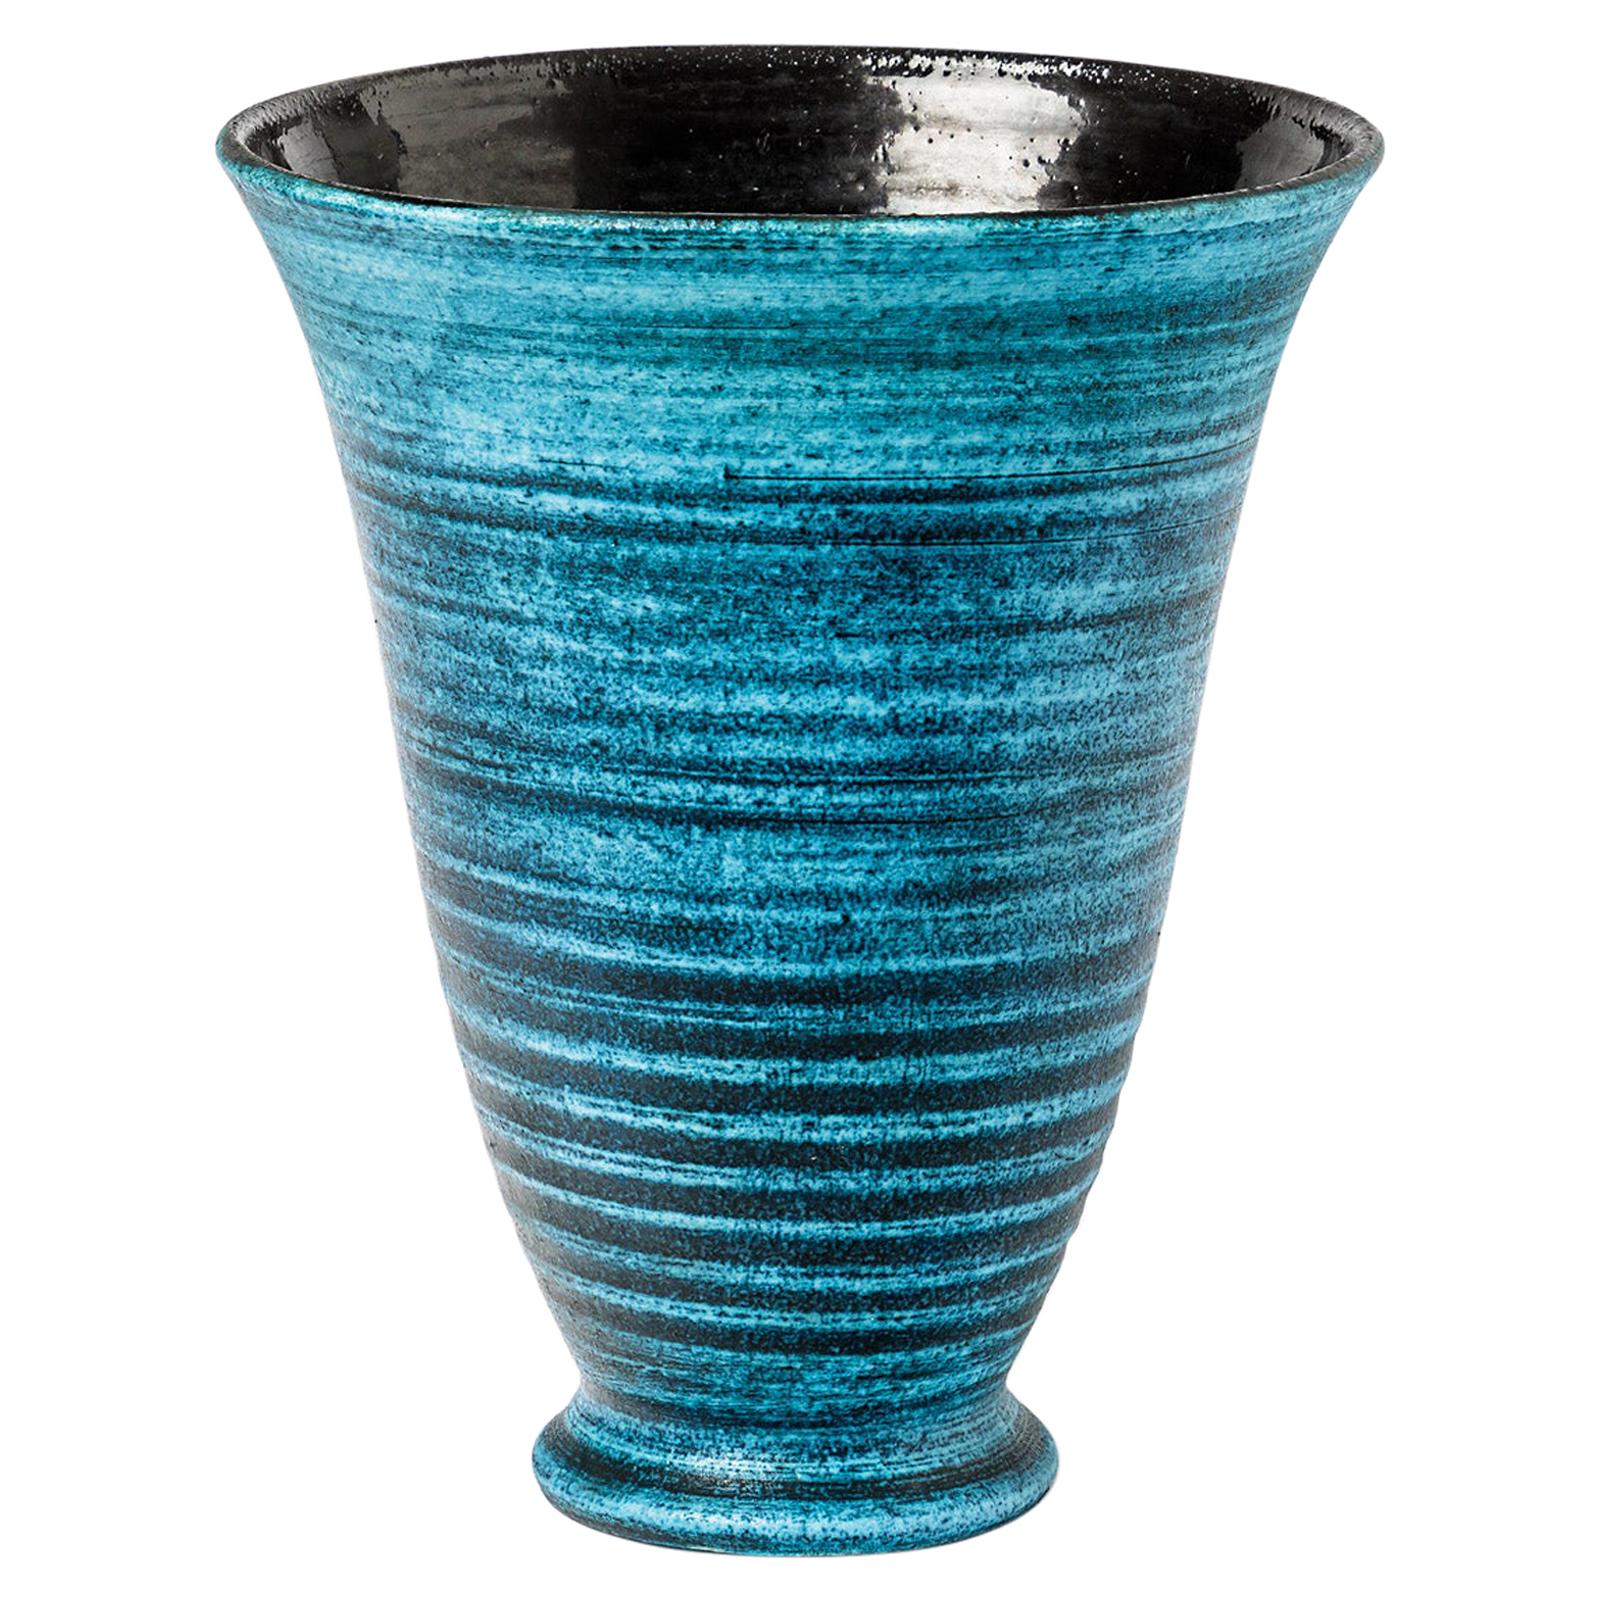 Ceramic Vase with Blue Glaze Decoration by Accolay, circa 1960-1970 For Sale